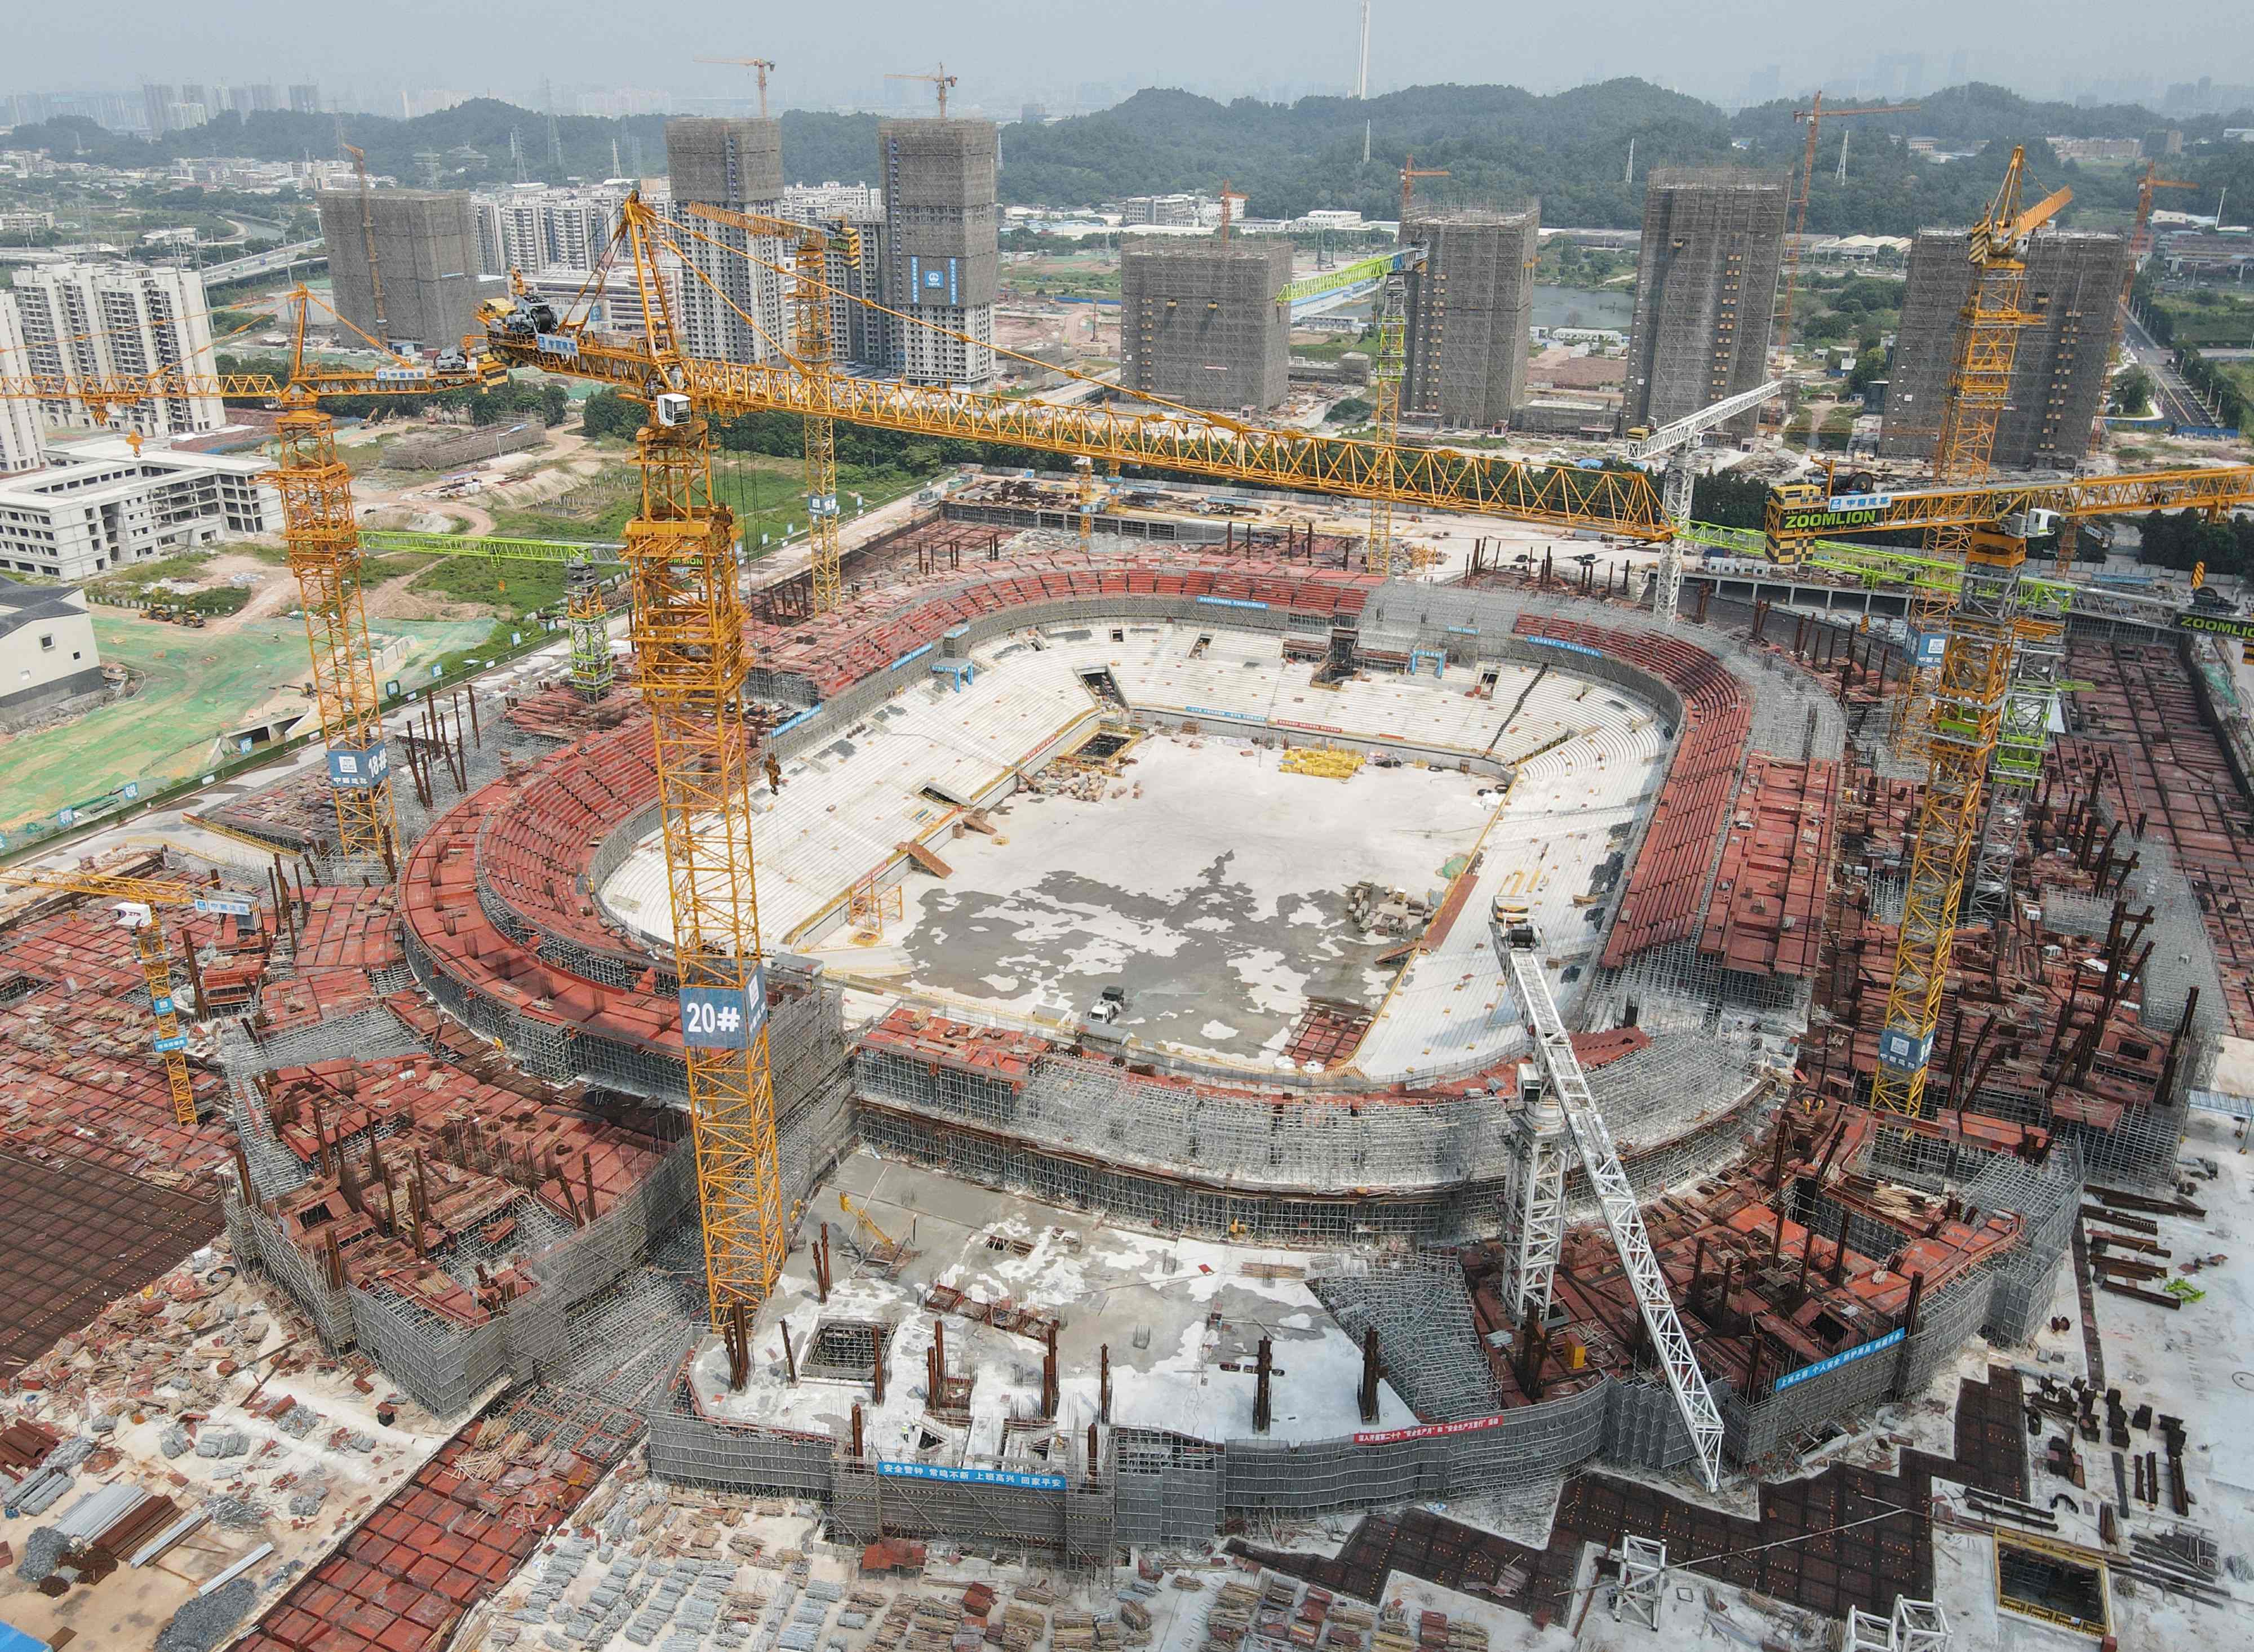 The under-construction football stadium in Guangzhou that Evergrande was developing